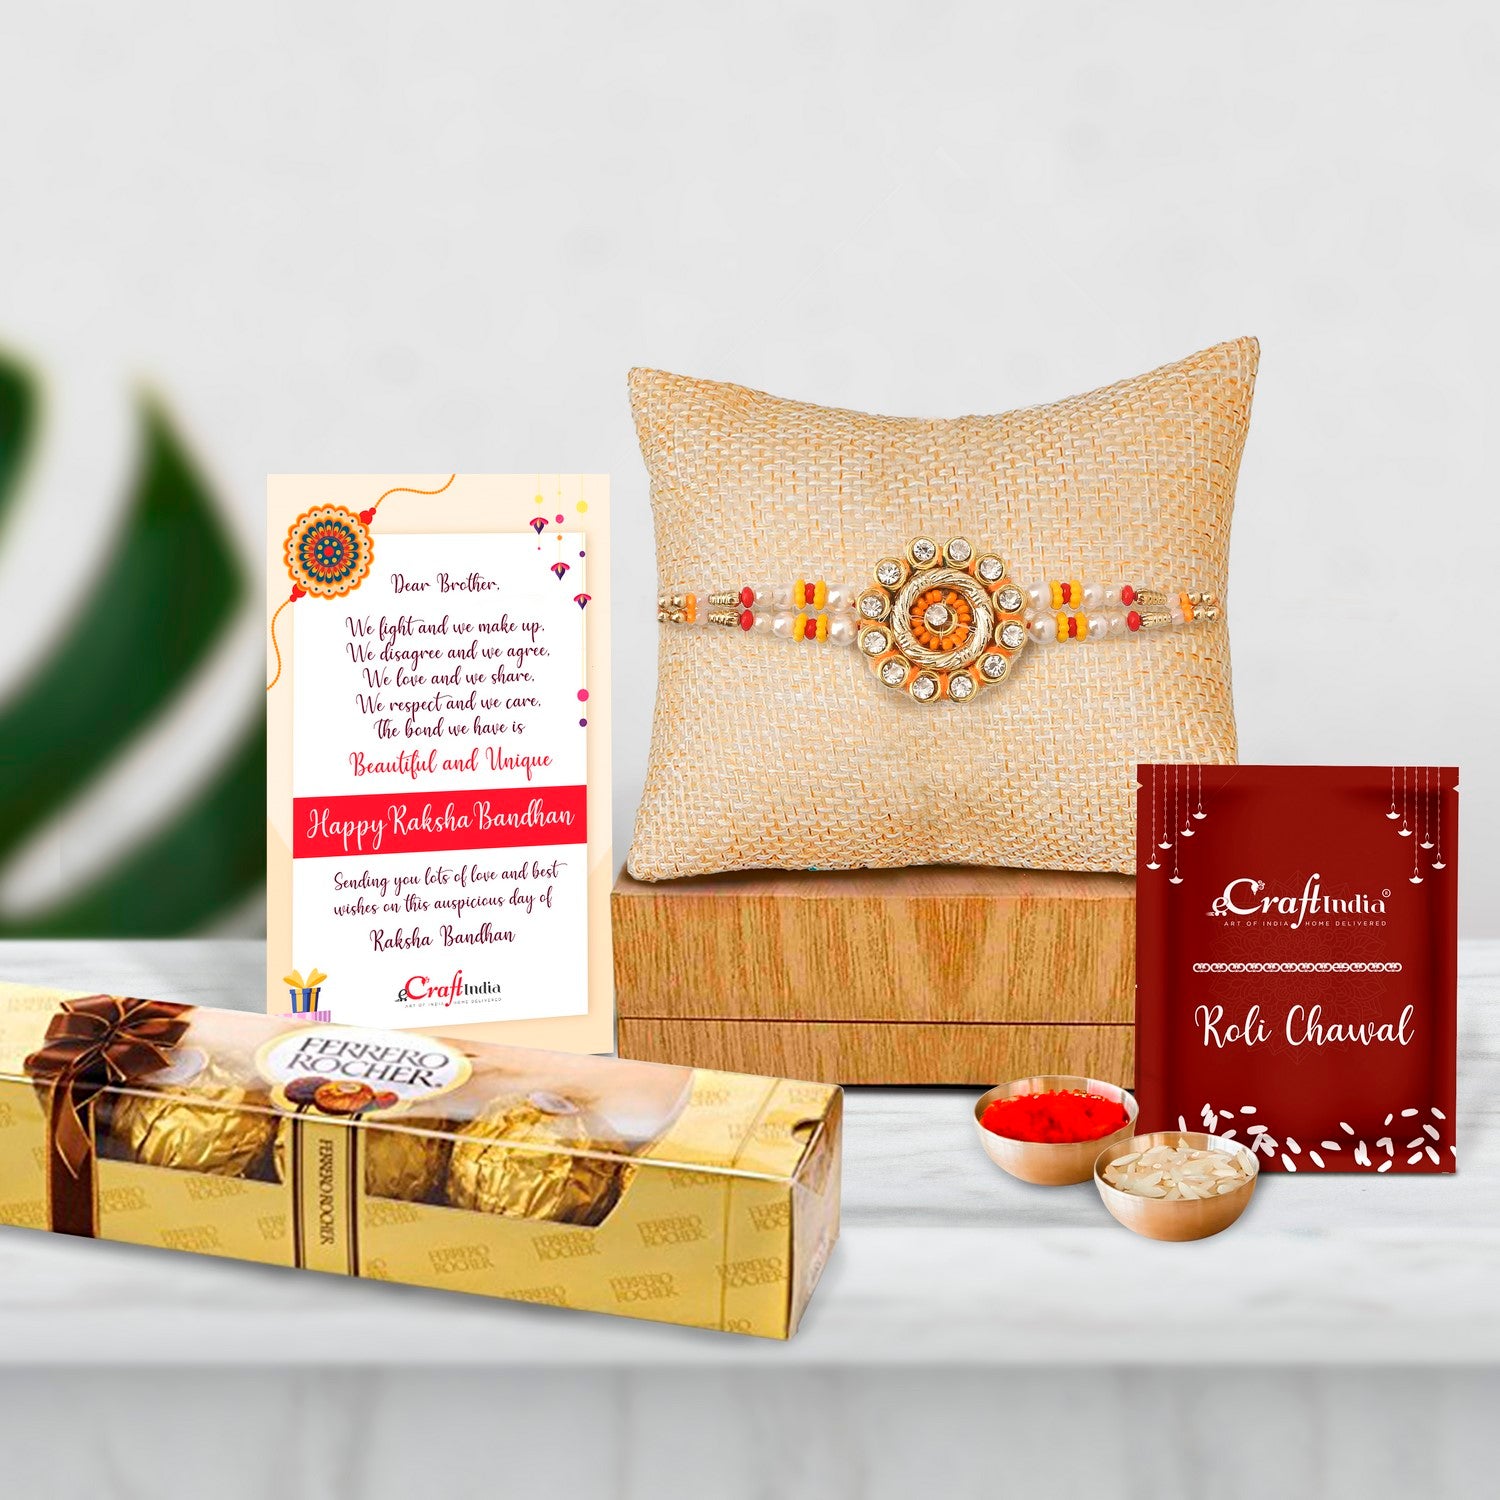 Designer Rakhi with Ferrero Rocher (4 pcs) and Roli Chawal Pack, Best Wishes Greeting Card